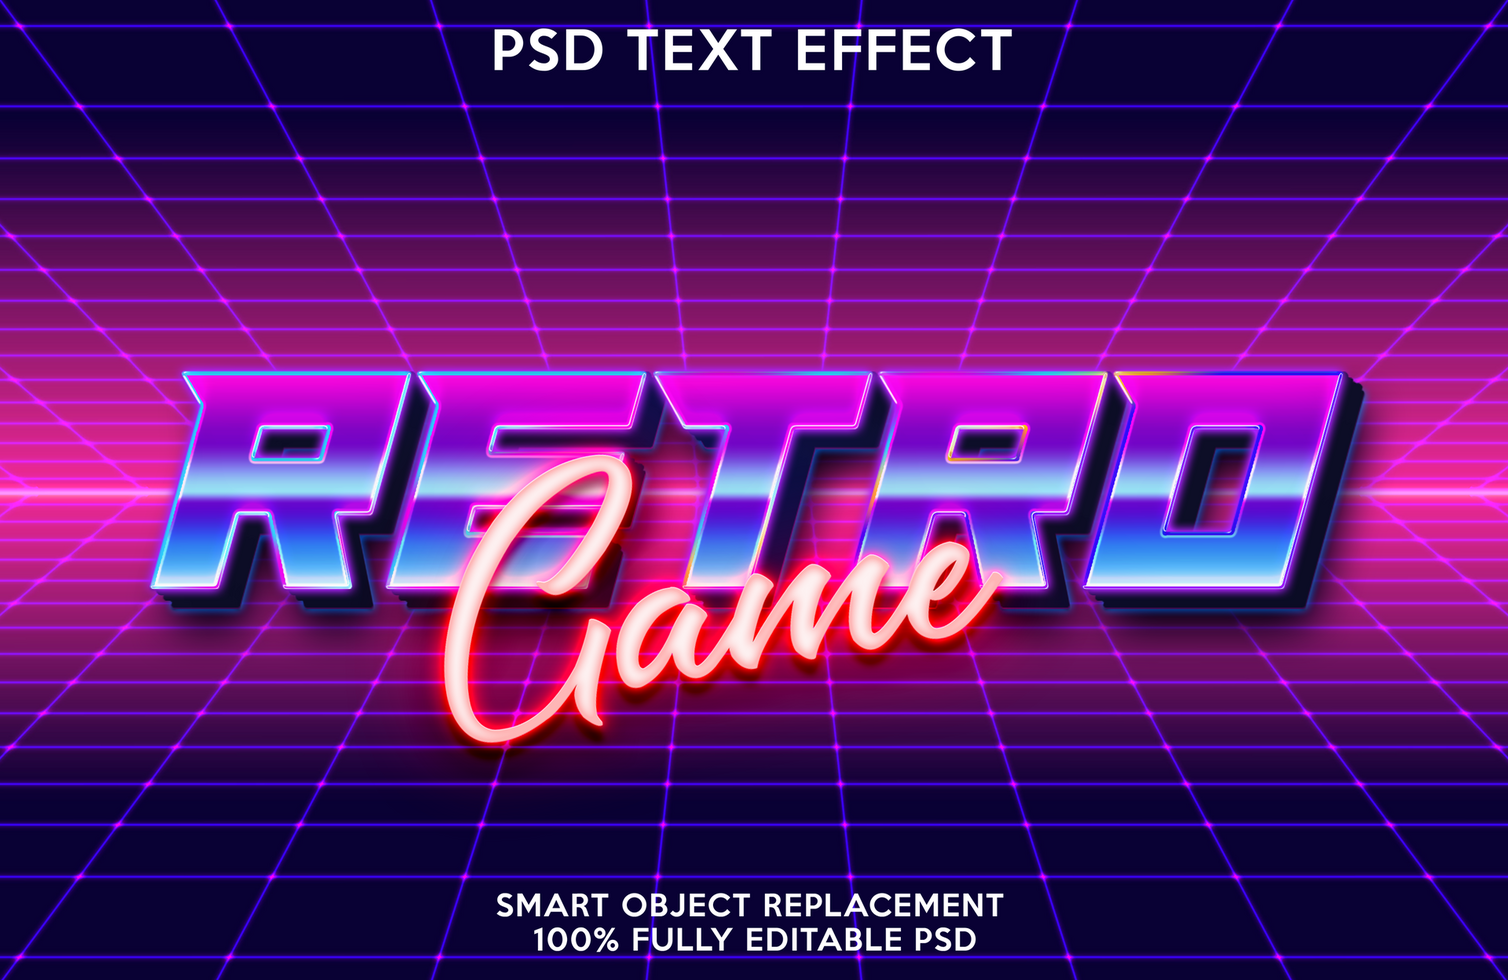 retro game text effect template psd